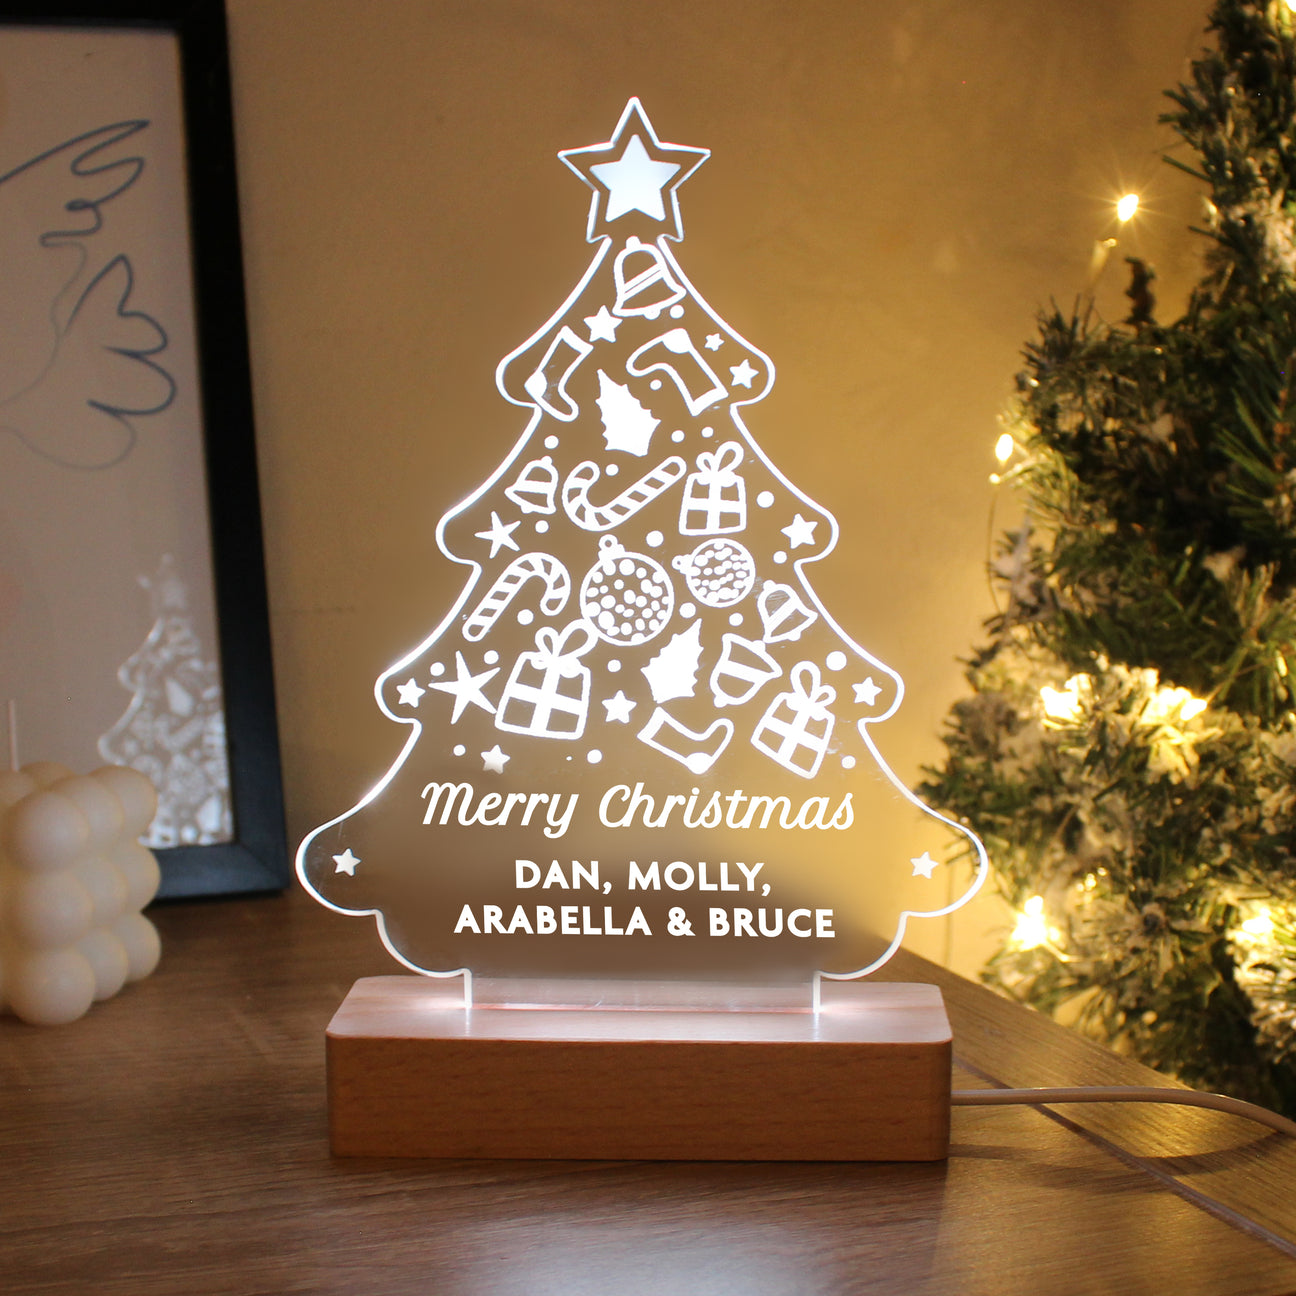 Personalised Christmas Gifts and Decorations